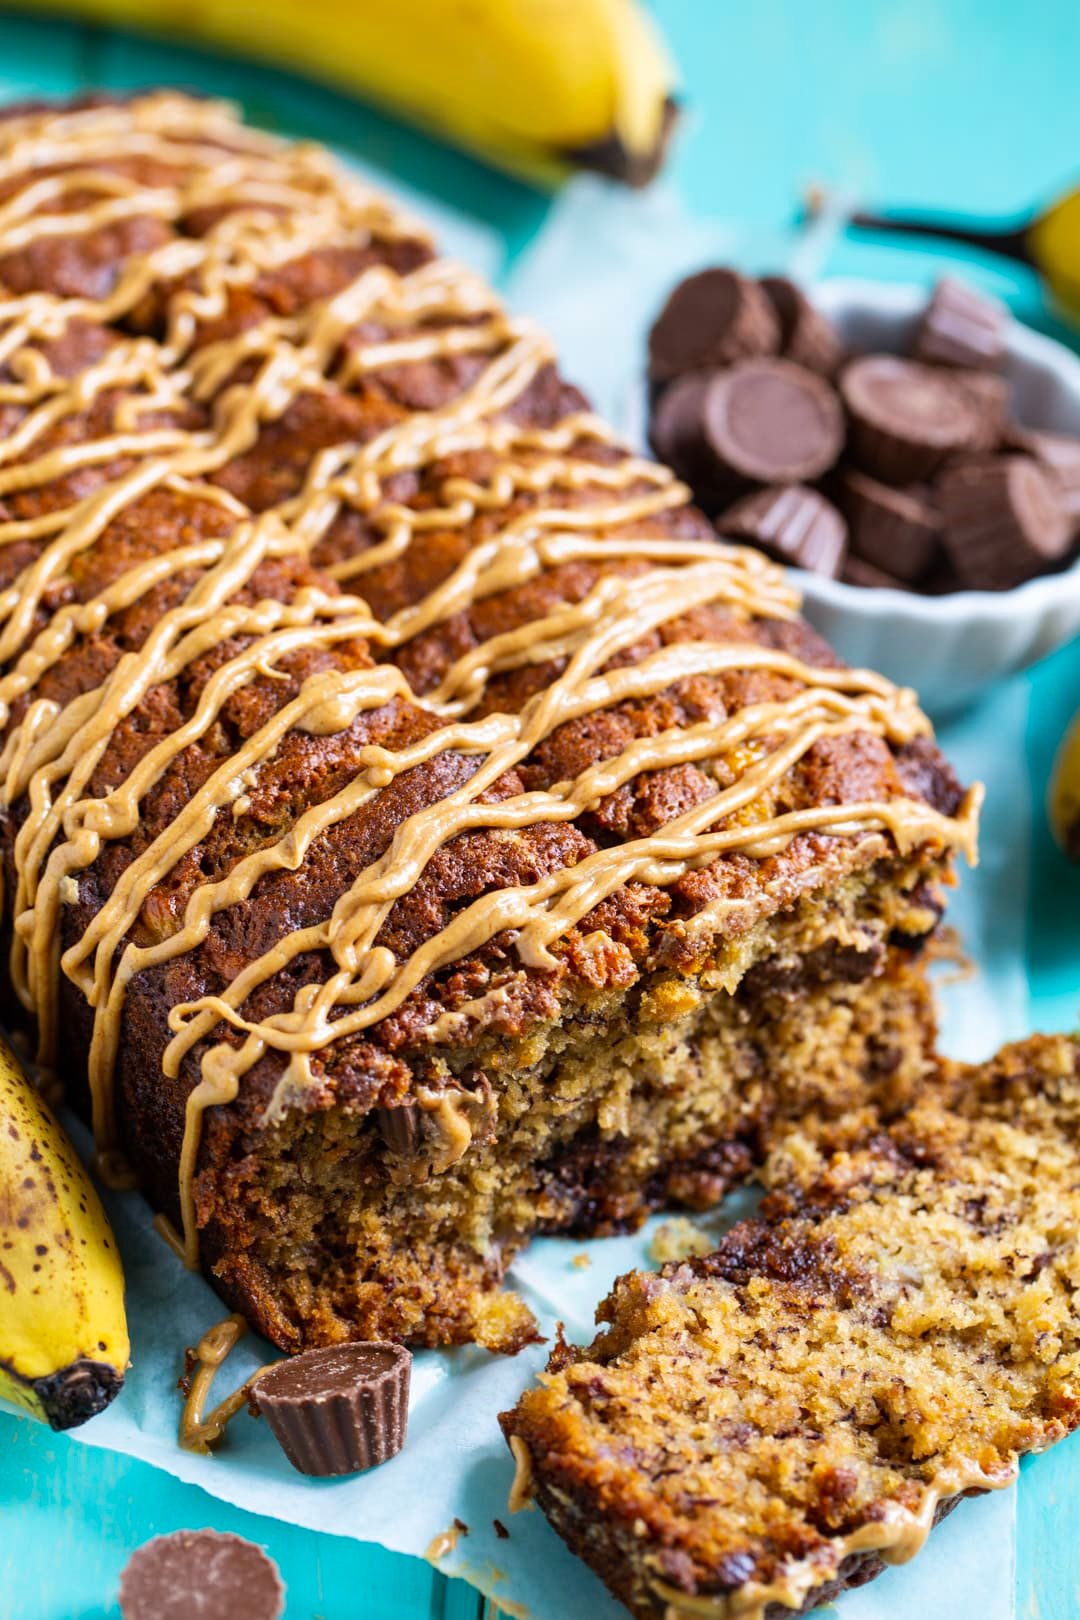 Banana Bread topped with peanut butter drizzle.